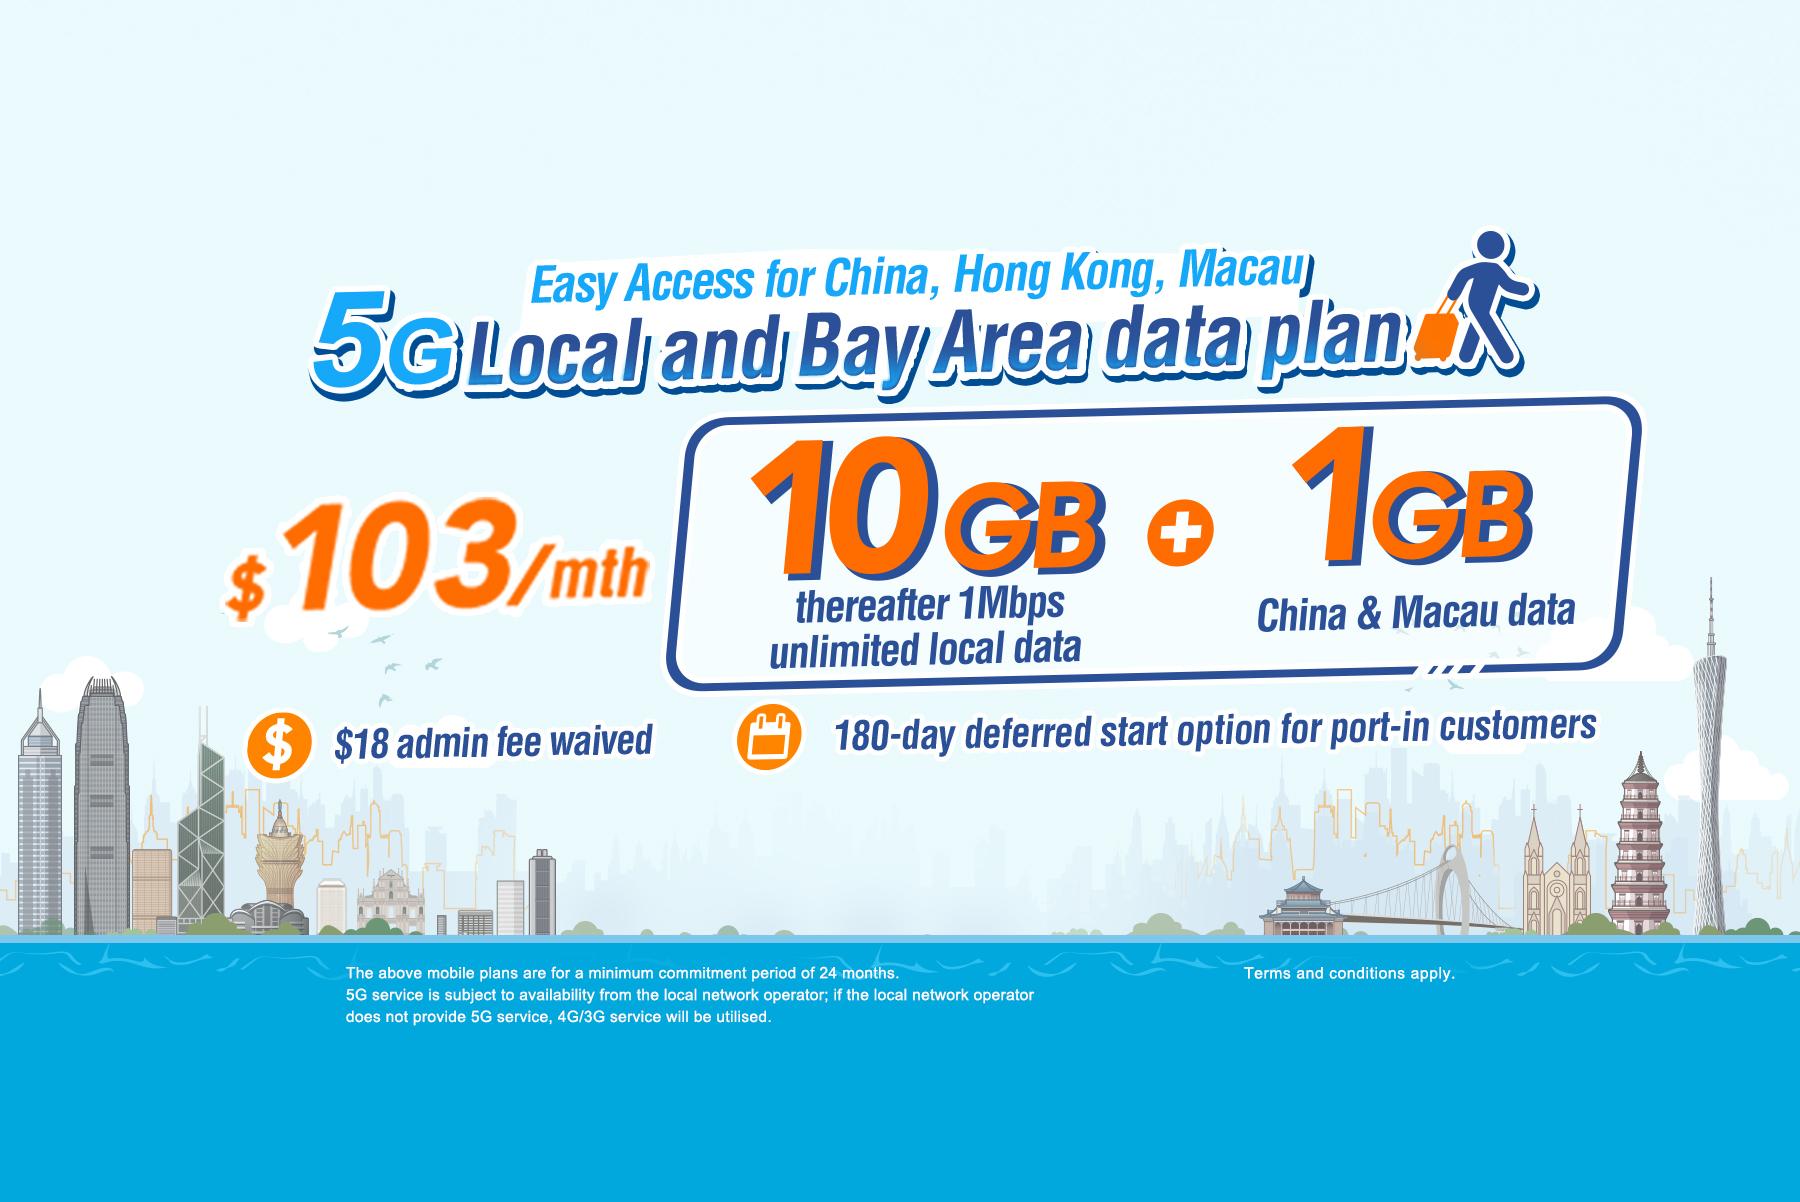 HKBN Launches Cross-border 5G Local + 1GB GBA Data Plans Disruptive Mobile Service Plans Start from HK$103/mth